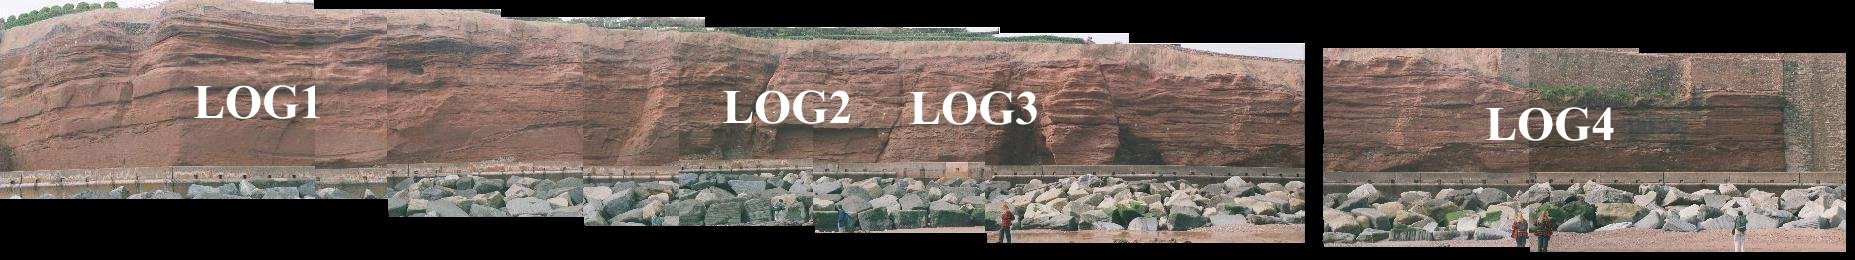 Panoramic view of the outcrop with logs marked on for reference.